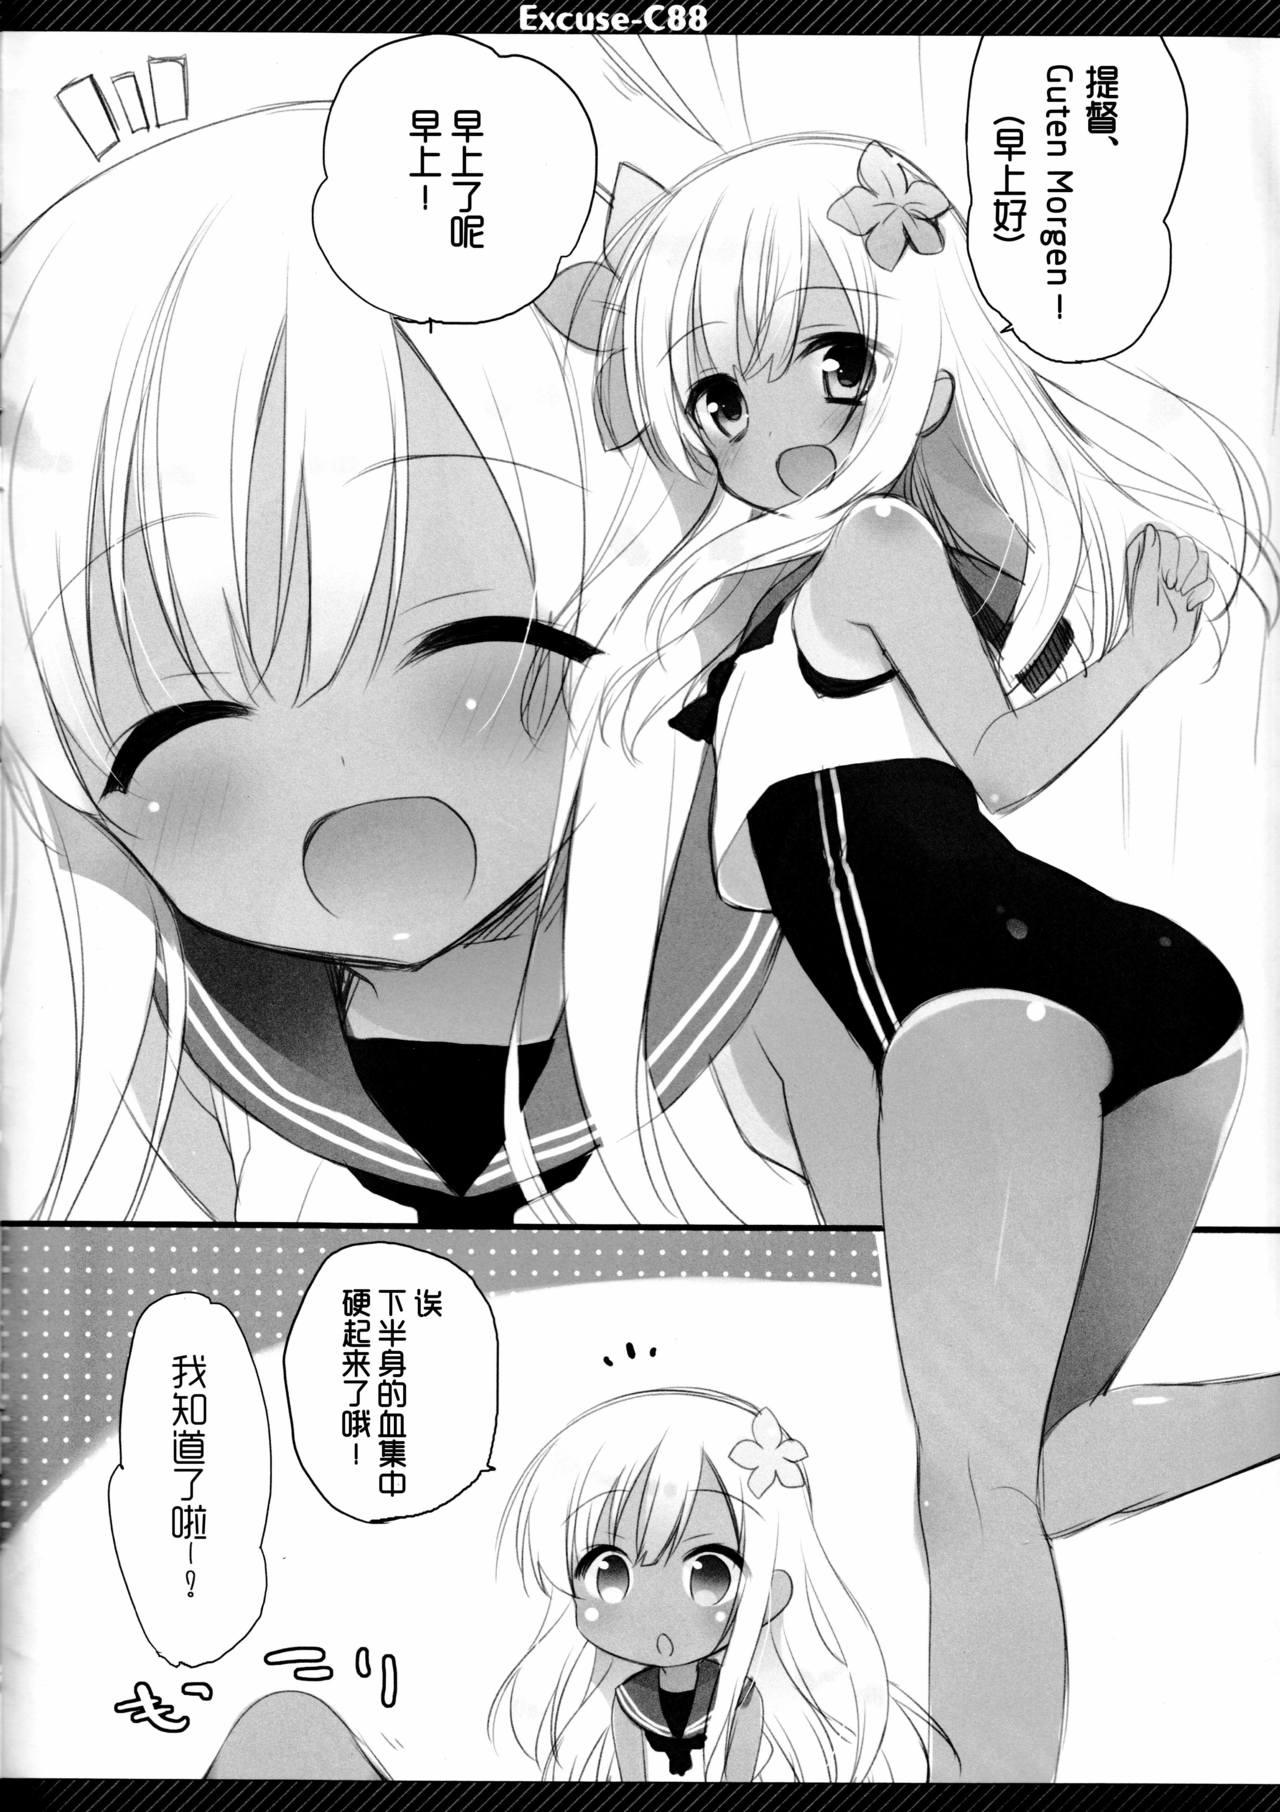 Dirty Talk Excuse;C88 - Kantai collection Cougars - Page 4